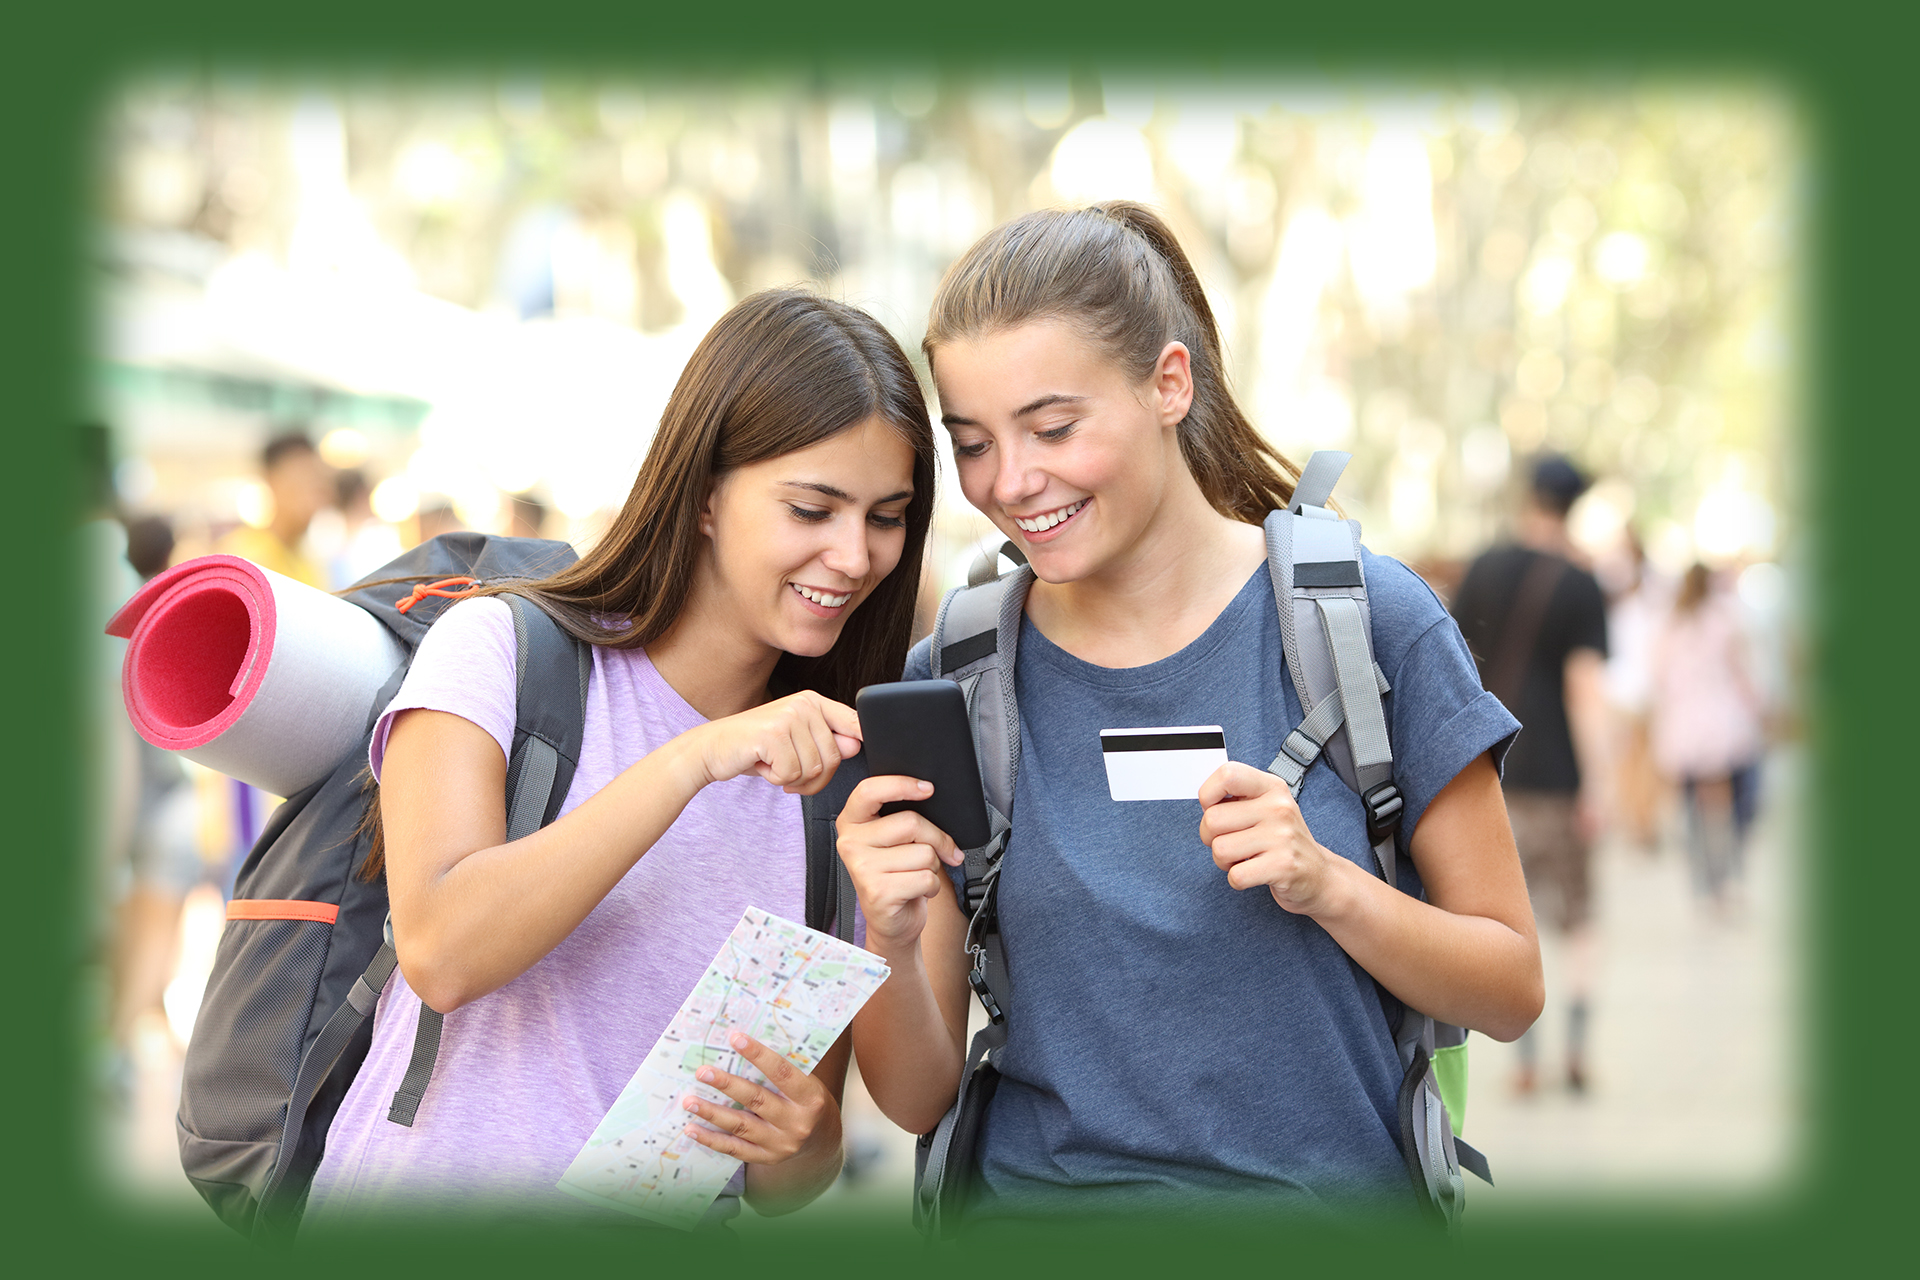 two women smiling and looking at a cell phone, one woman has a debit card in hand